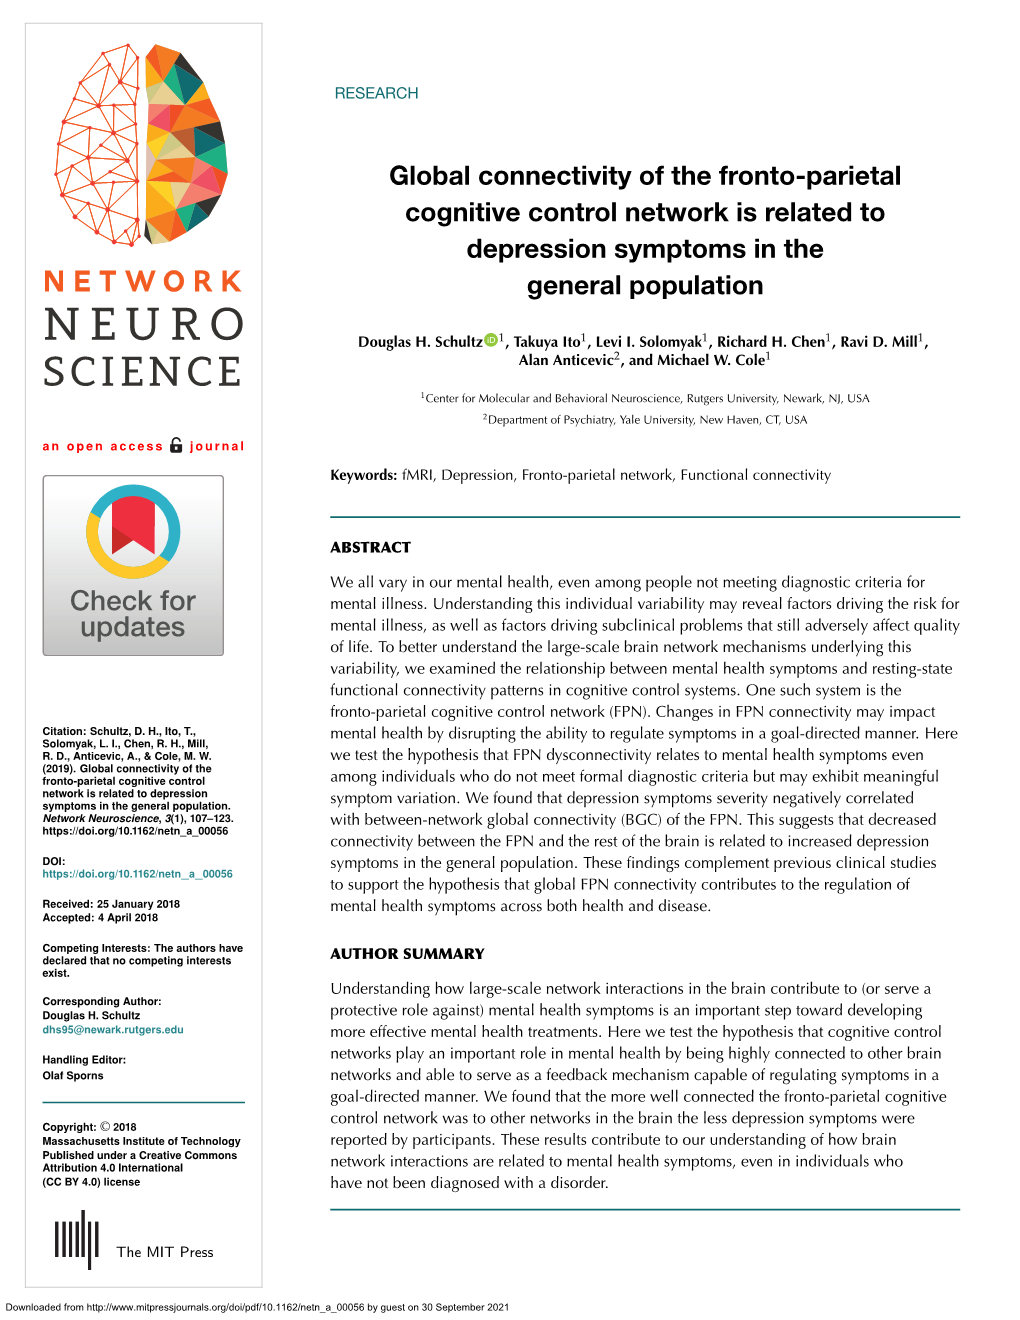 Global Connectivity of the Fronto-Parietal Cognitive Control Network Is Related to Depression Symptoms in the General Population